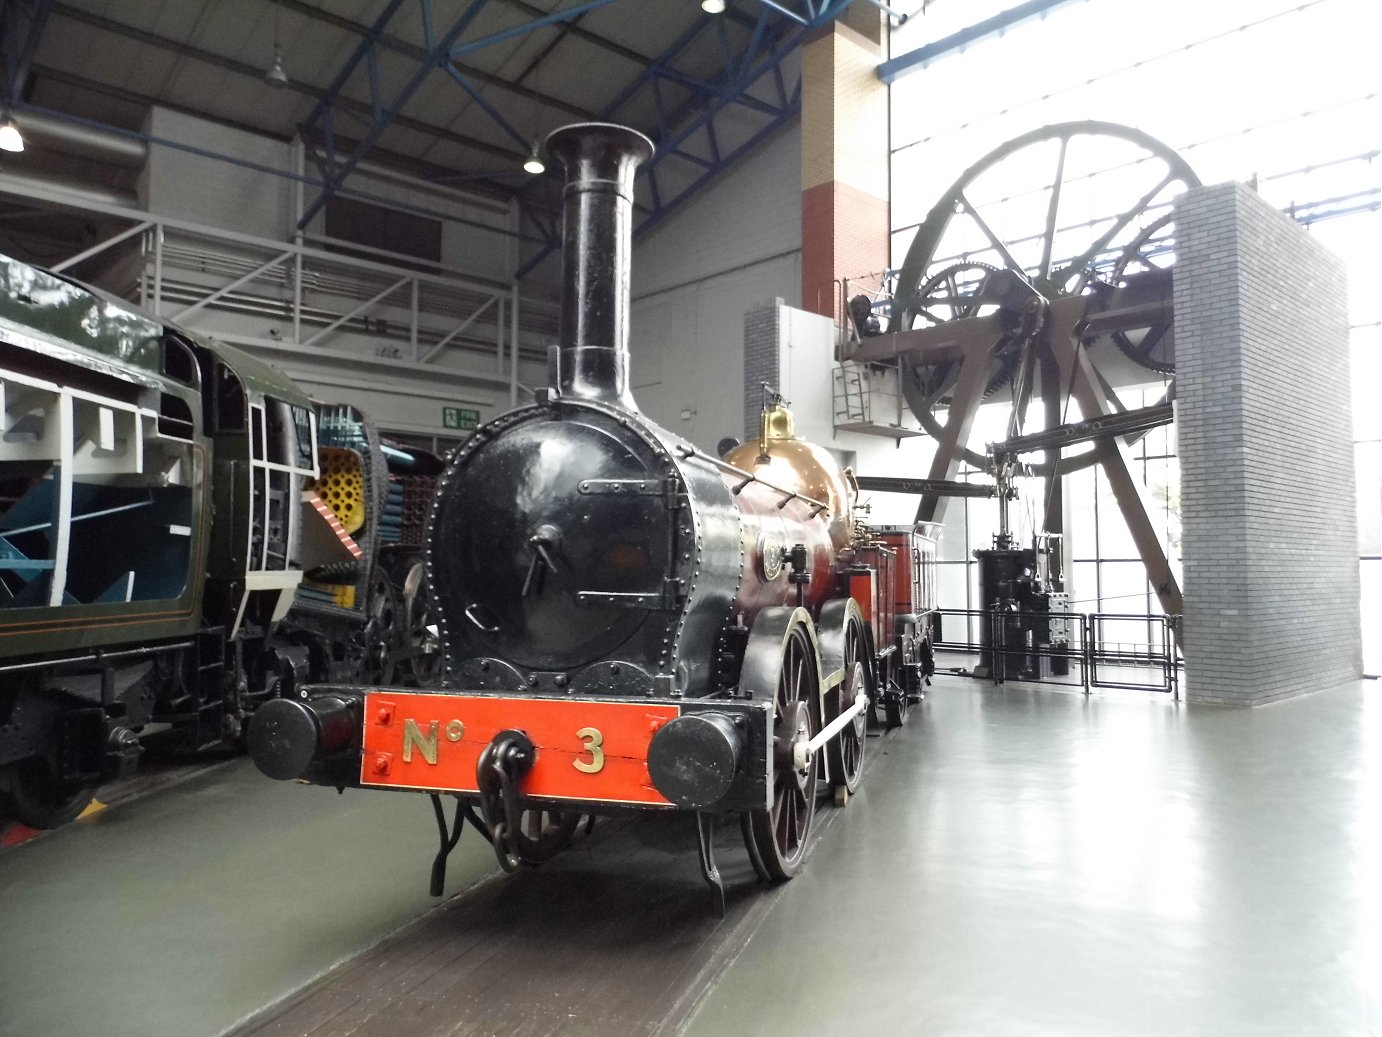 3 Coppernob at the National Raiway Museum, Thurs 27/05/2021. 